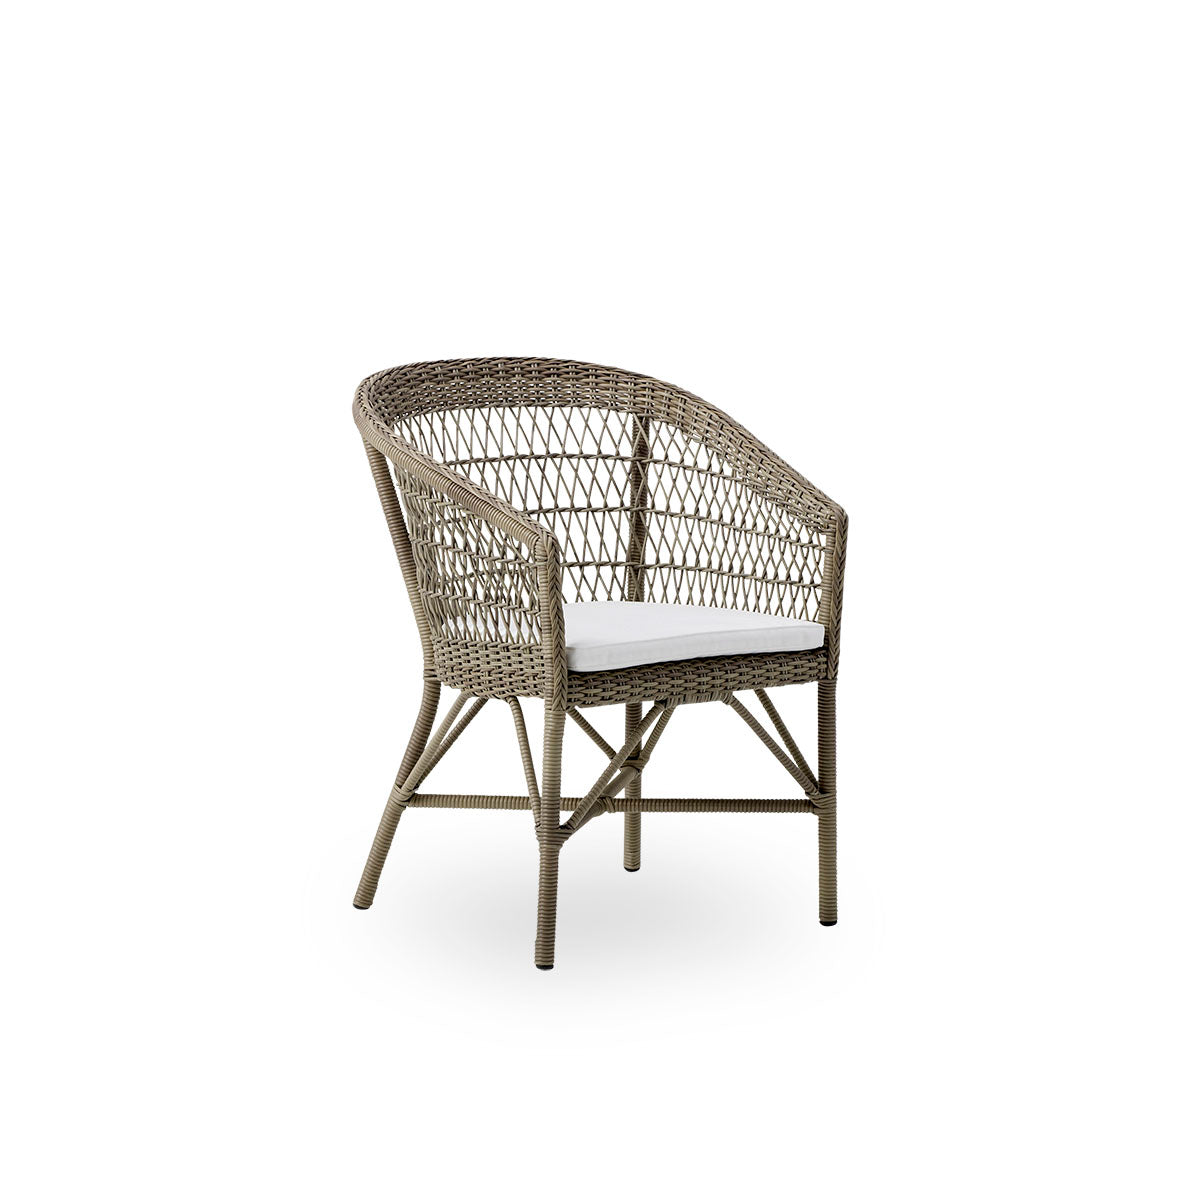 Emma Exterior Chair | Seat cushion by Sika